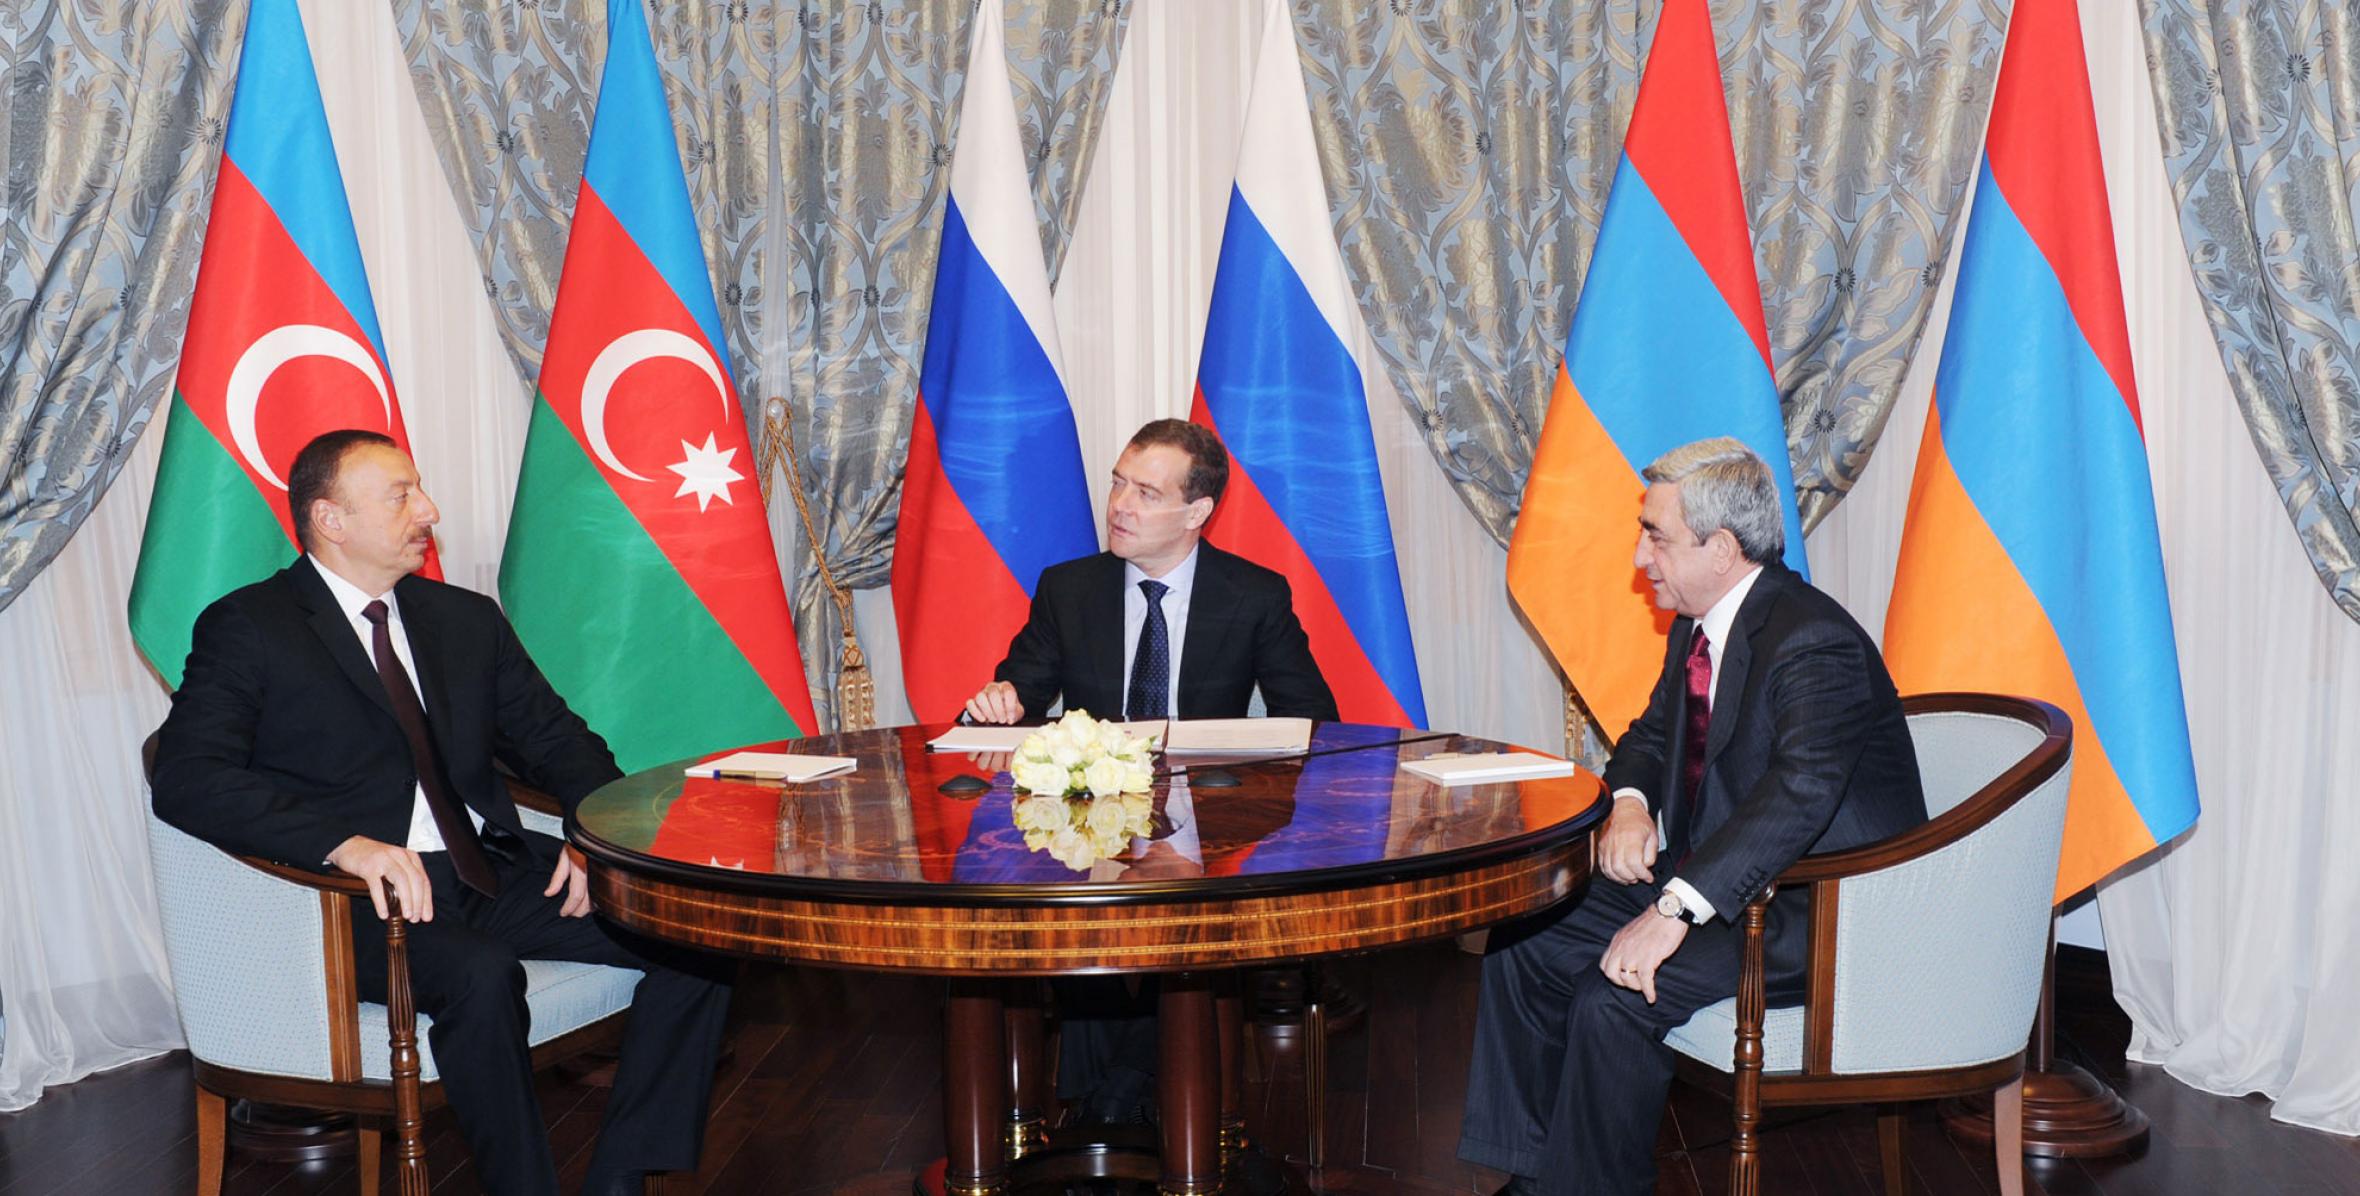 Joint meeting took place in Sochi between the Presidents of Azerbaijan, Russia and Armenia